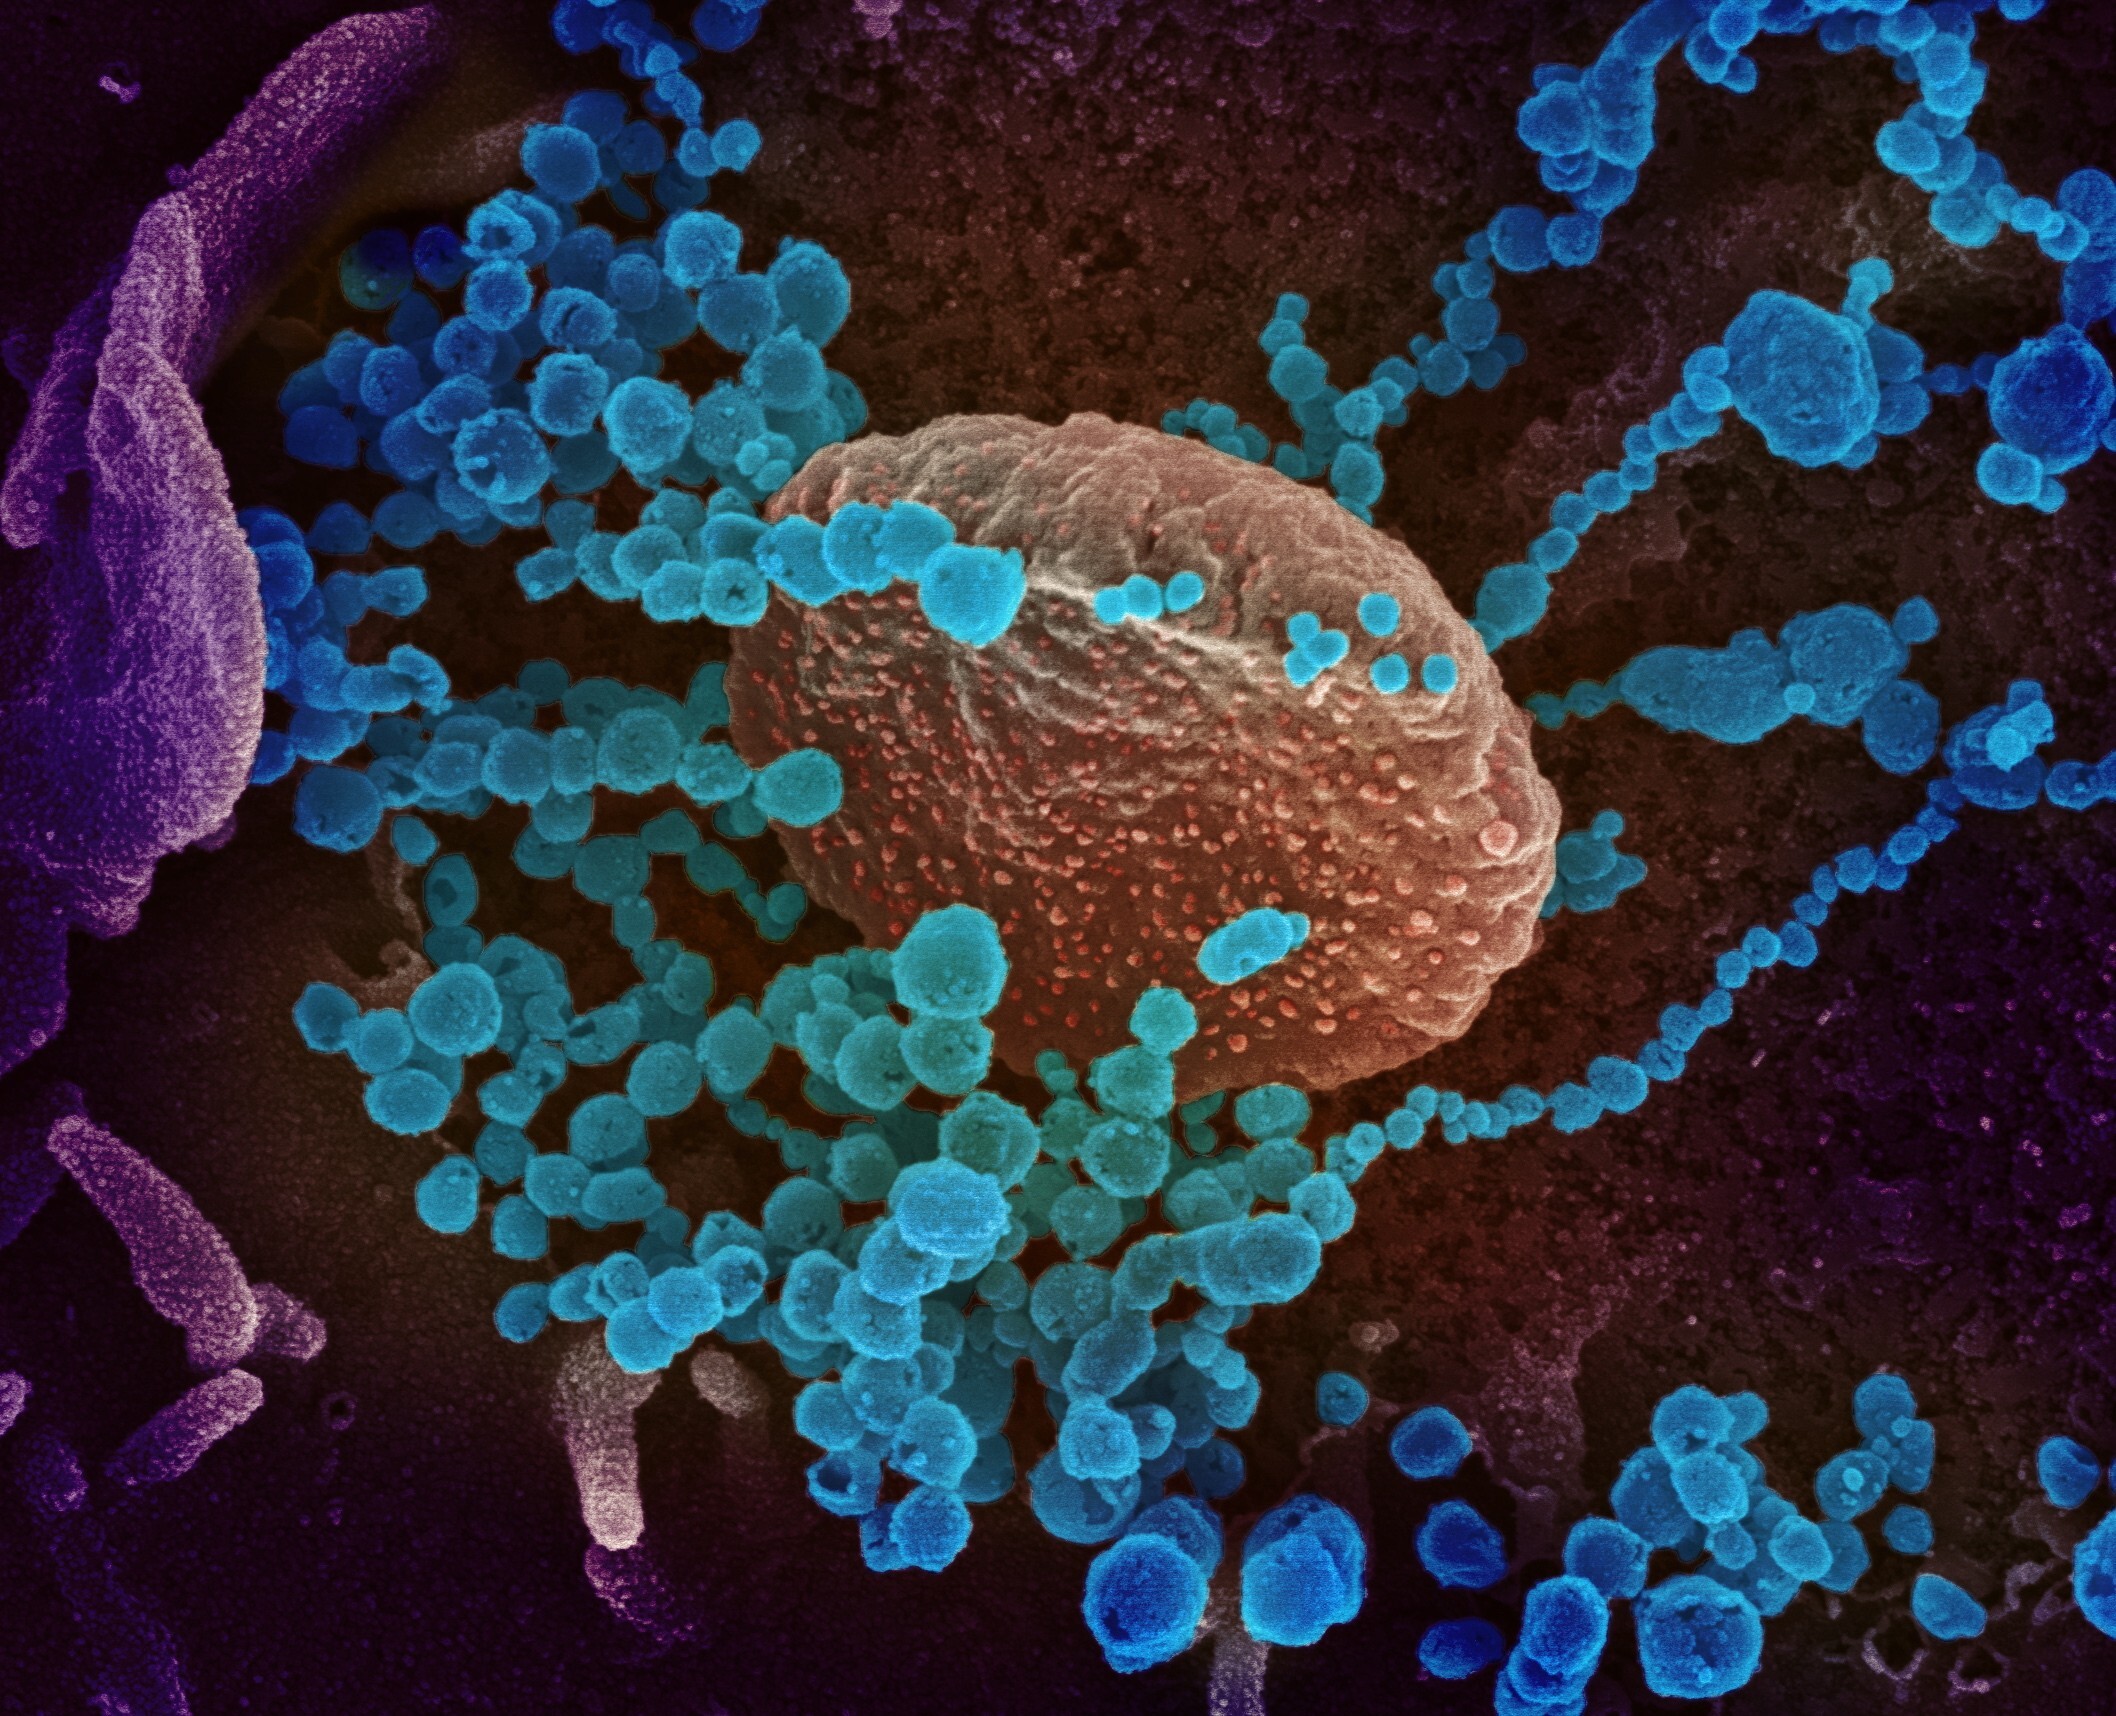 A scanning electron microscope image shows the new coronavirus (round blue objects) emerging from the surface of cells cultured in the lab. Image: NIH via EPA-EFE